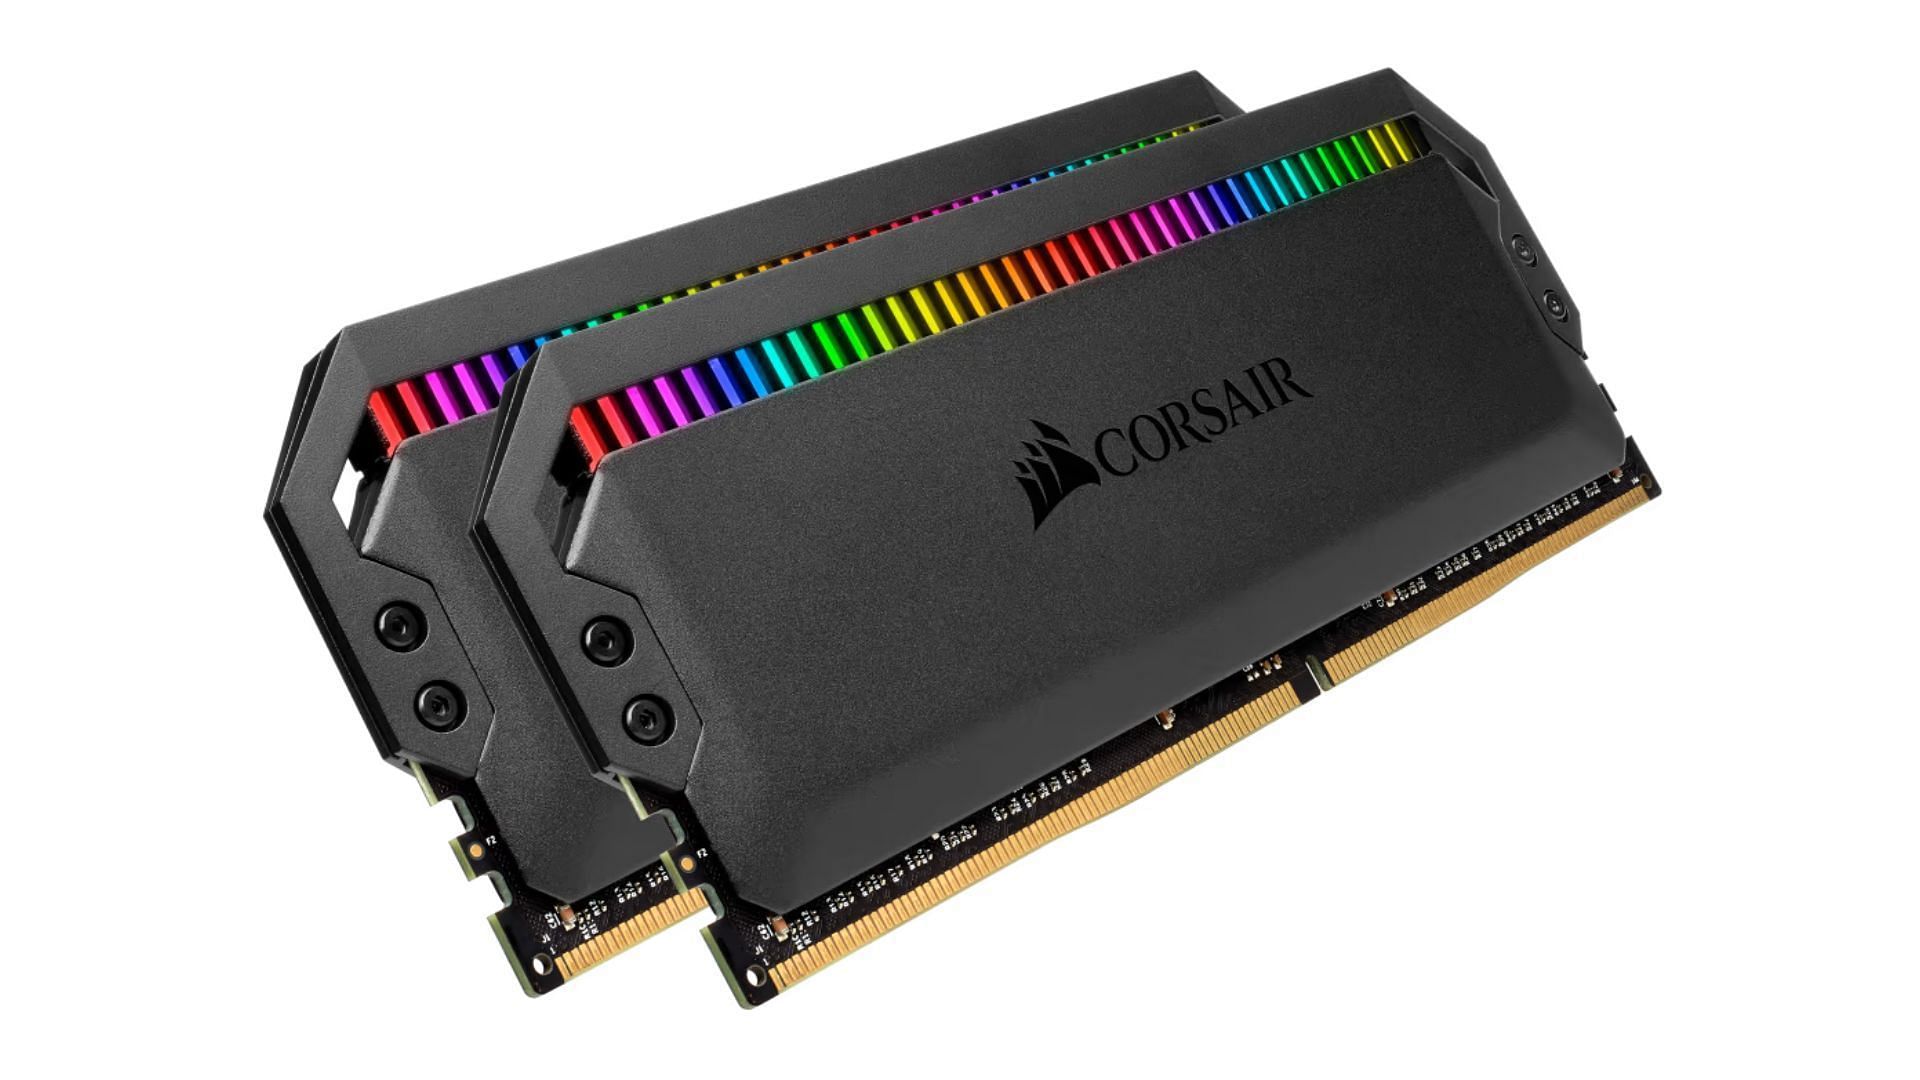 The Corsair Dominator Platinum is a pricey DDR4 RAM for gaming (Image via Corsair)